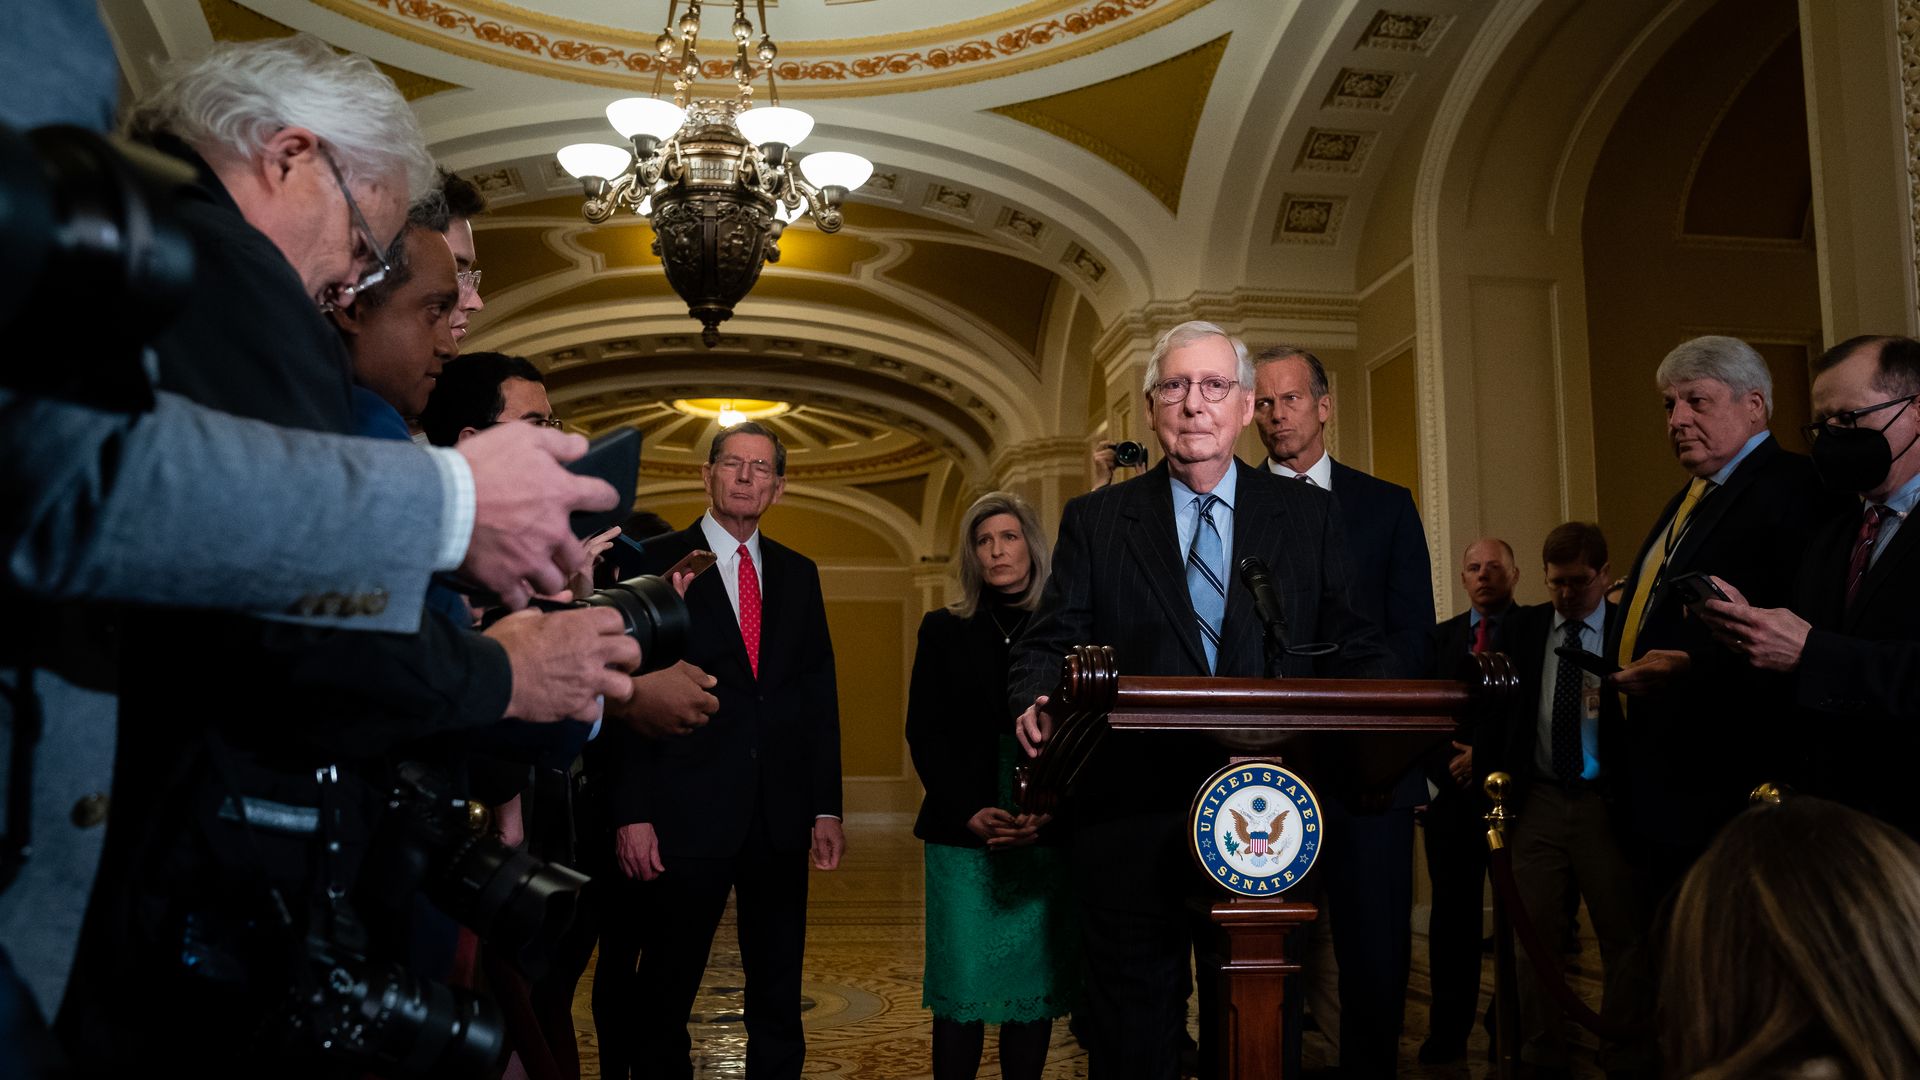 Senate Minority Leader Mitch McConnell flanked by other Senate GOP leaders.